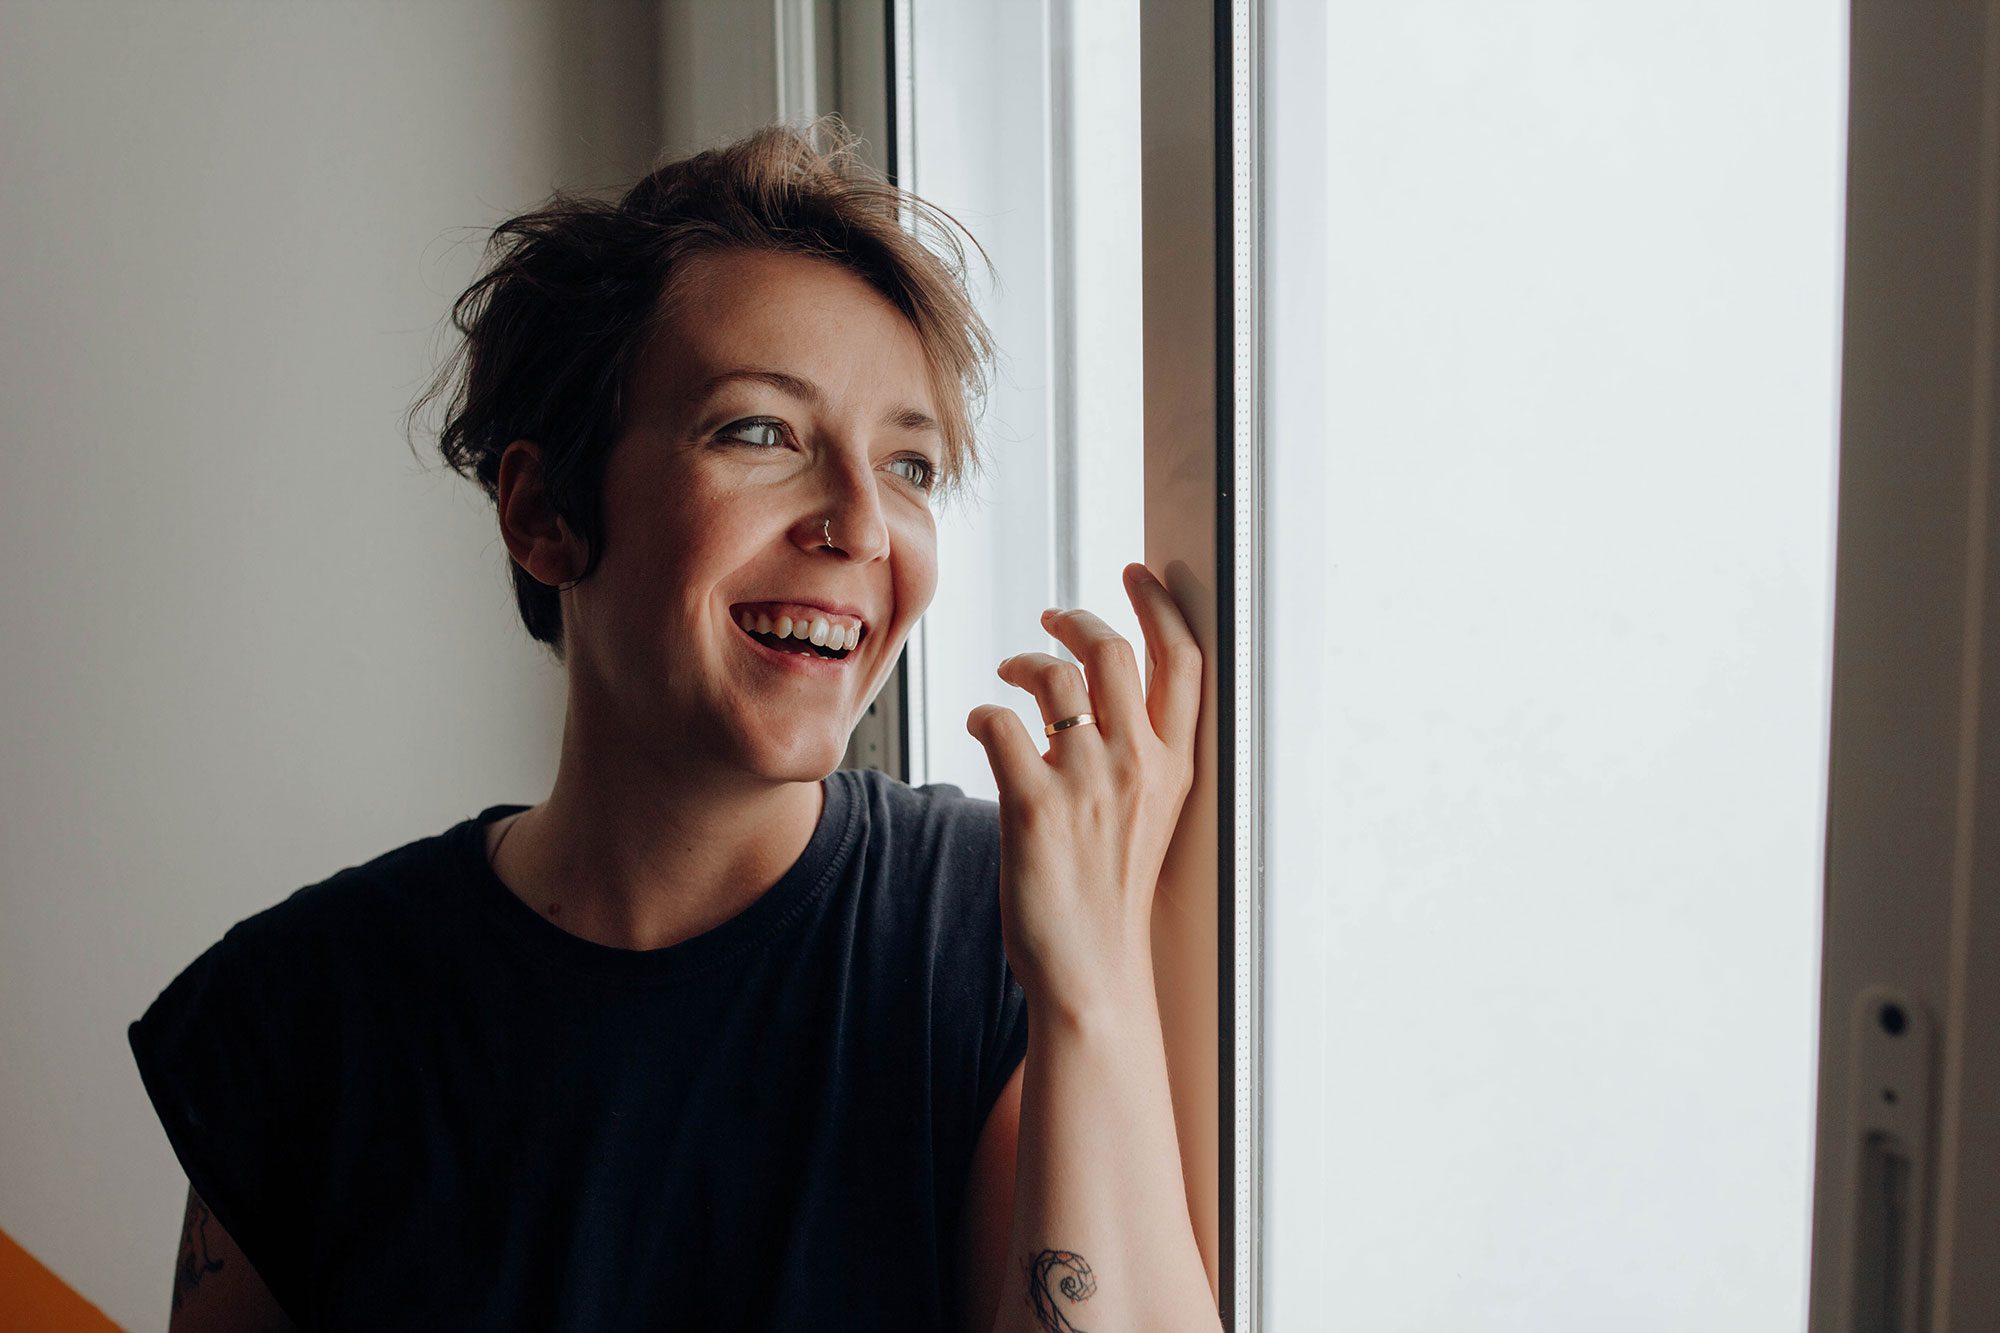 A disabled person with feminine features and short hair looks out the window and smiles.